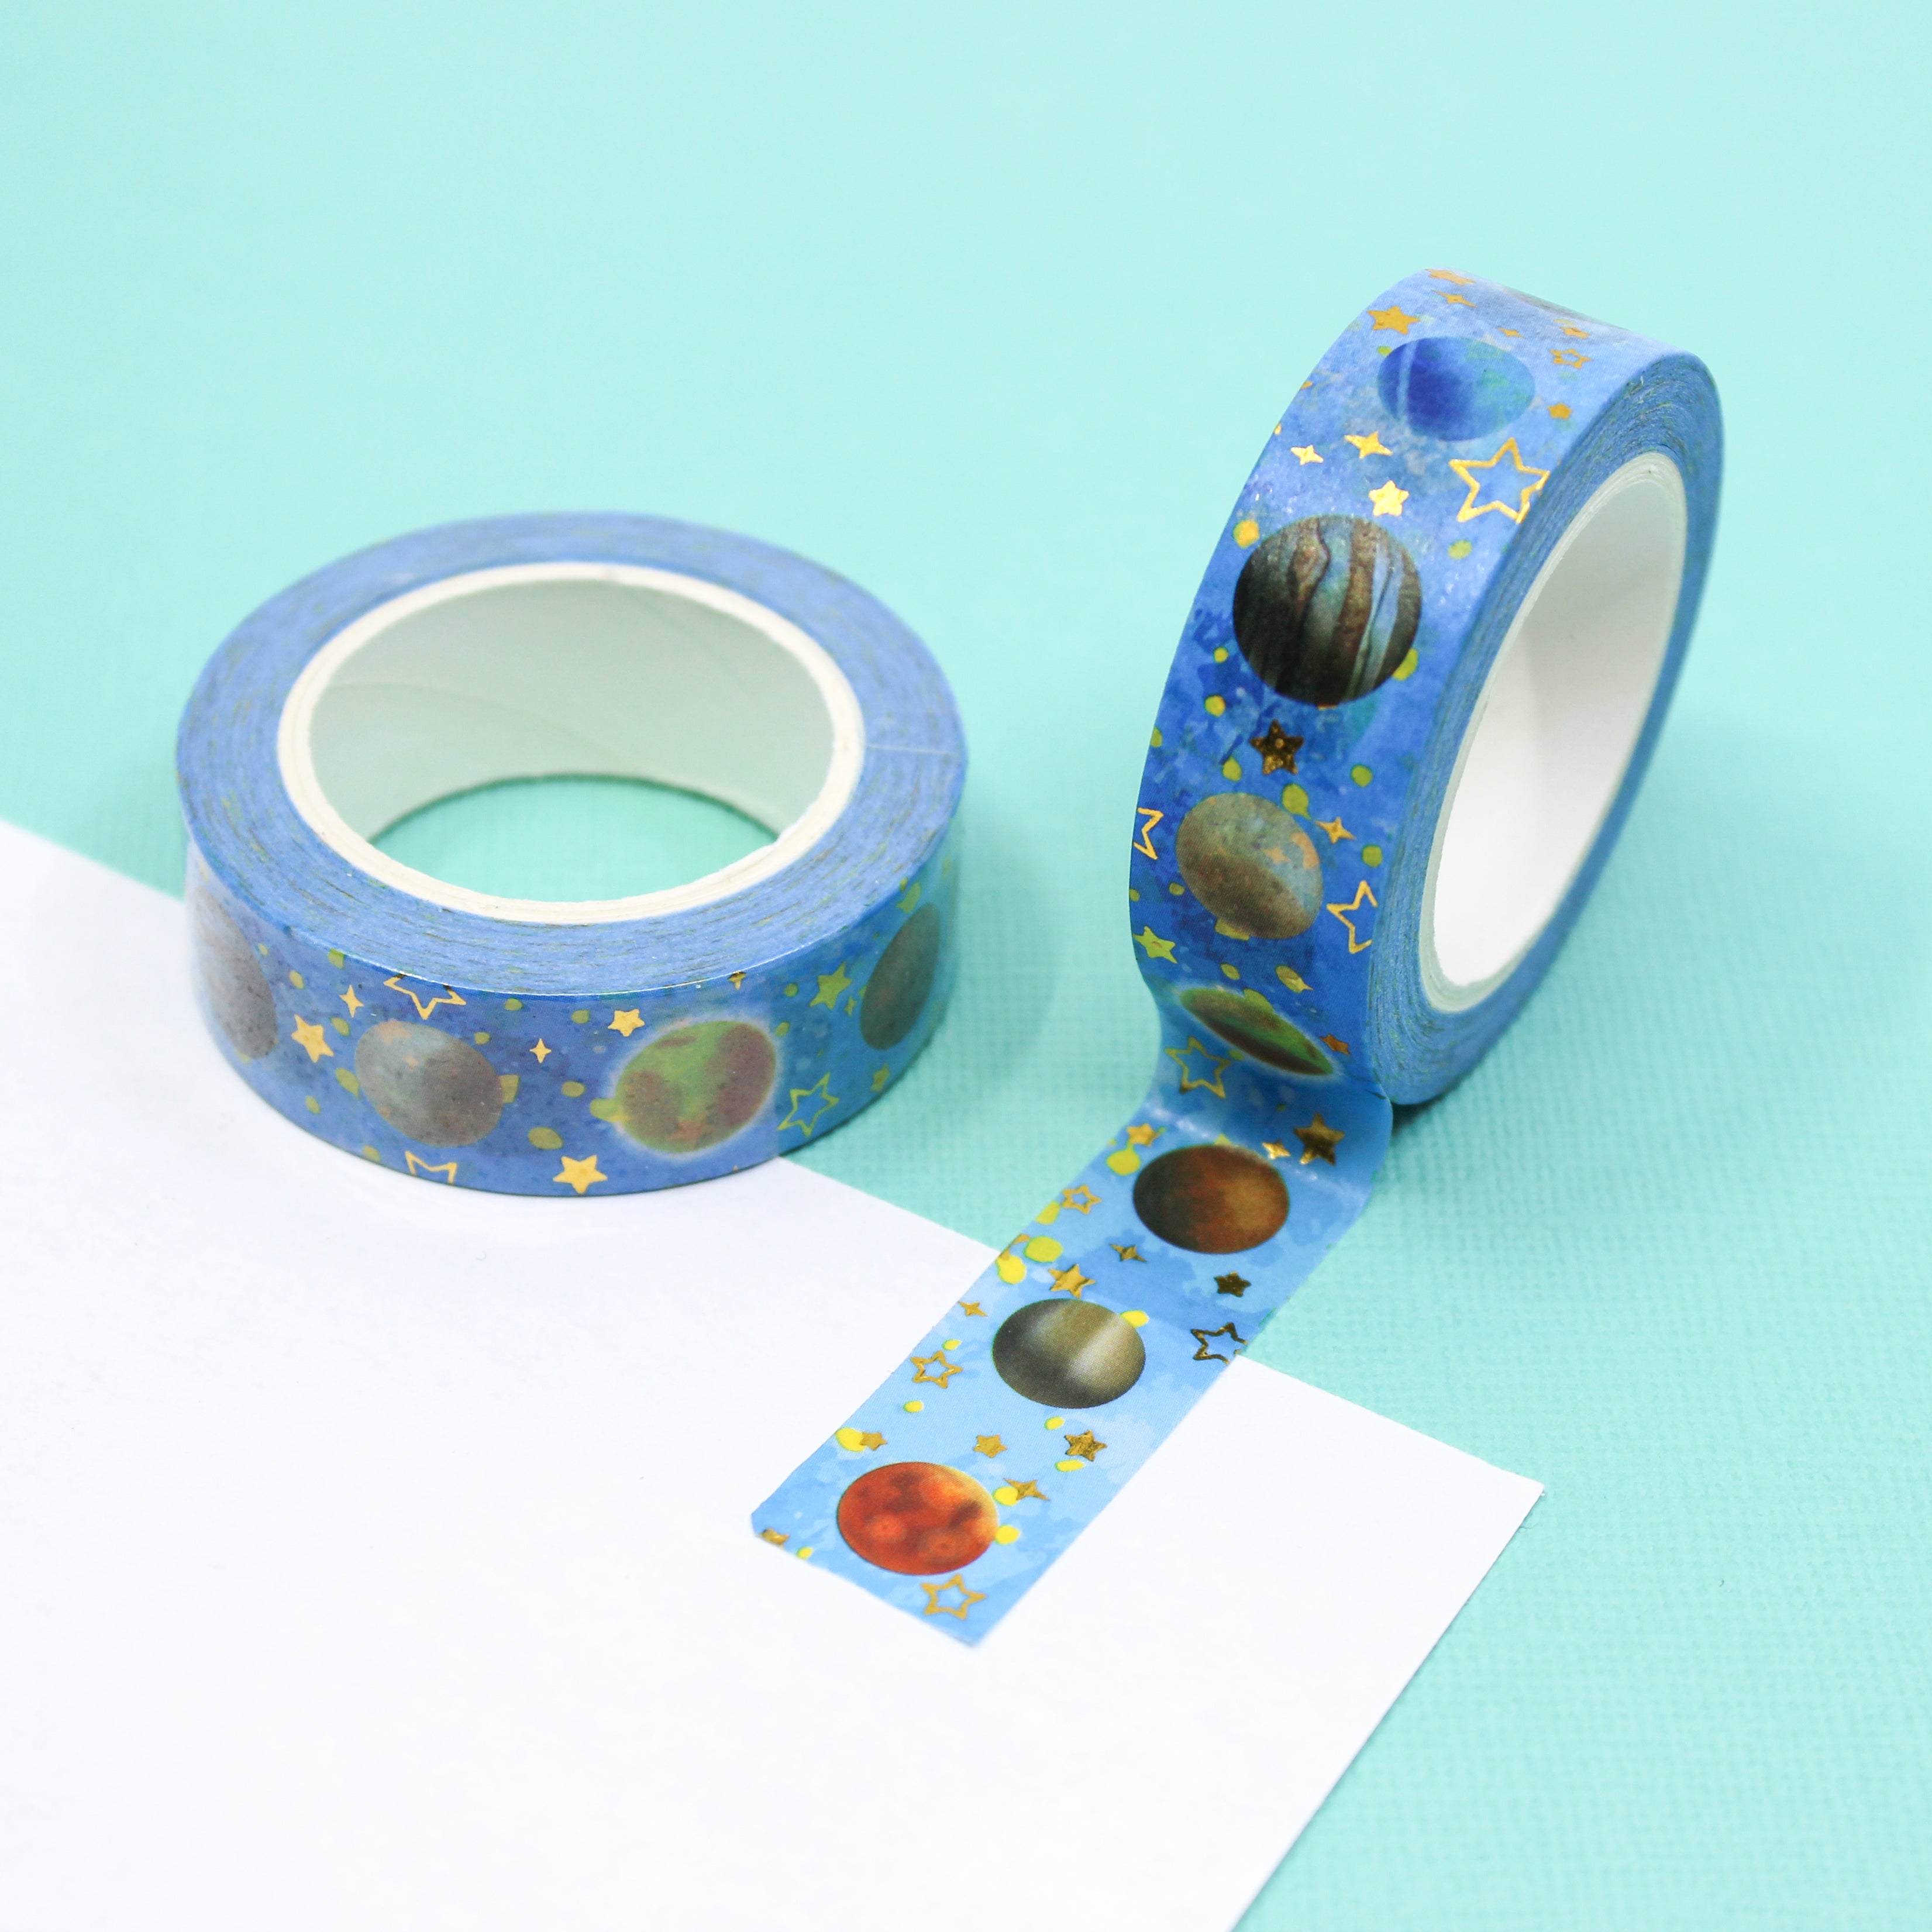 Embark on a cosmic journey with our Outer Space Planets Washi Tape, adorned with vibrant planet illustrations. Ideal for adding a touch of interstellar wonder to your projects. This tape is sold at BBB Supplies Craft Shop.